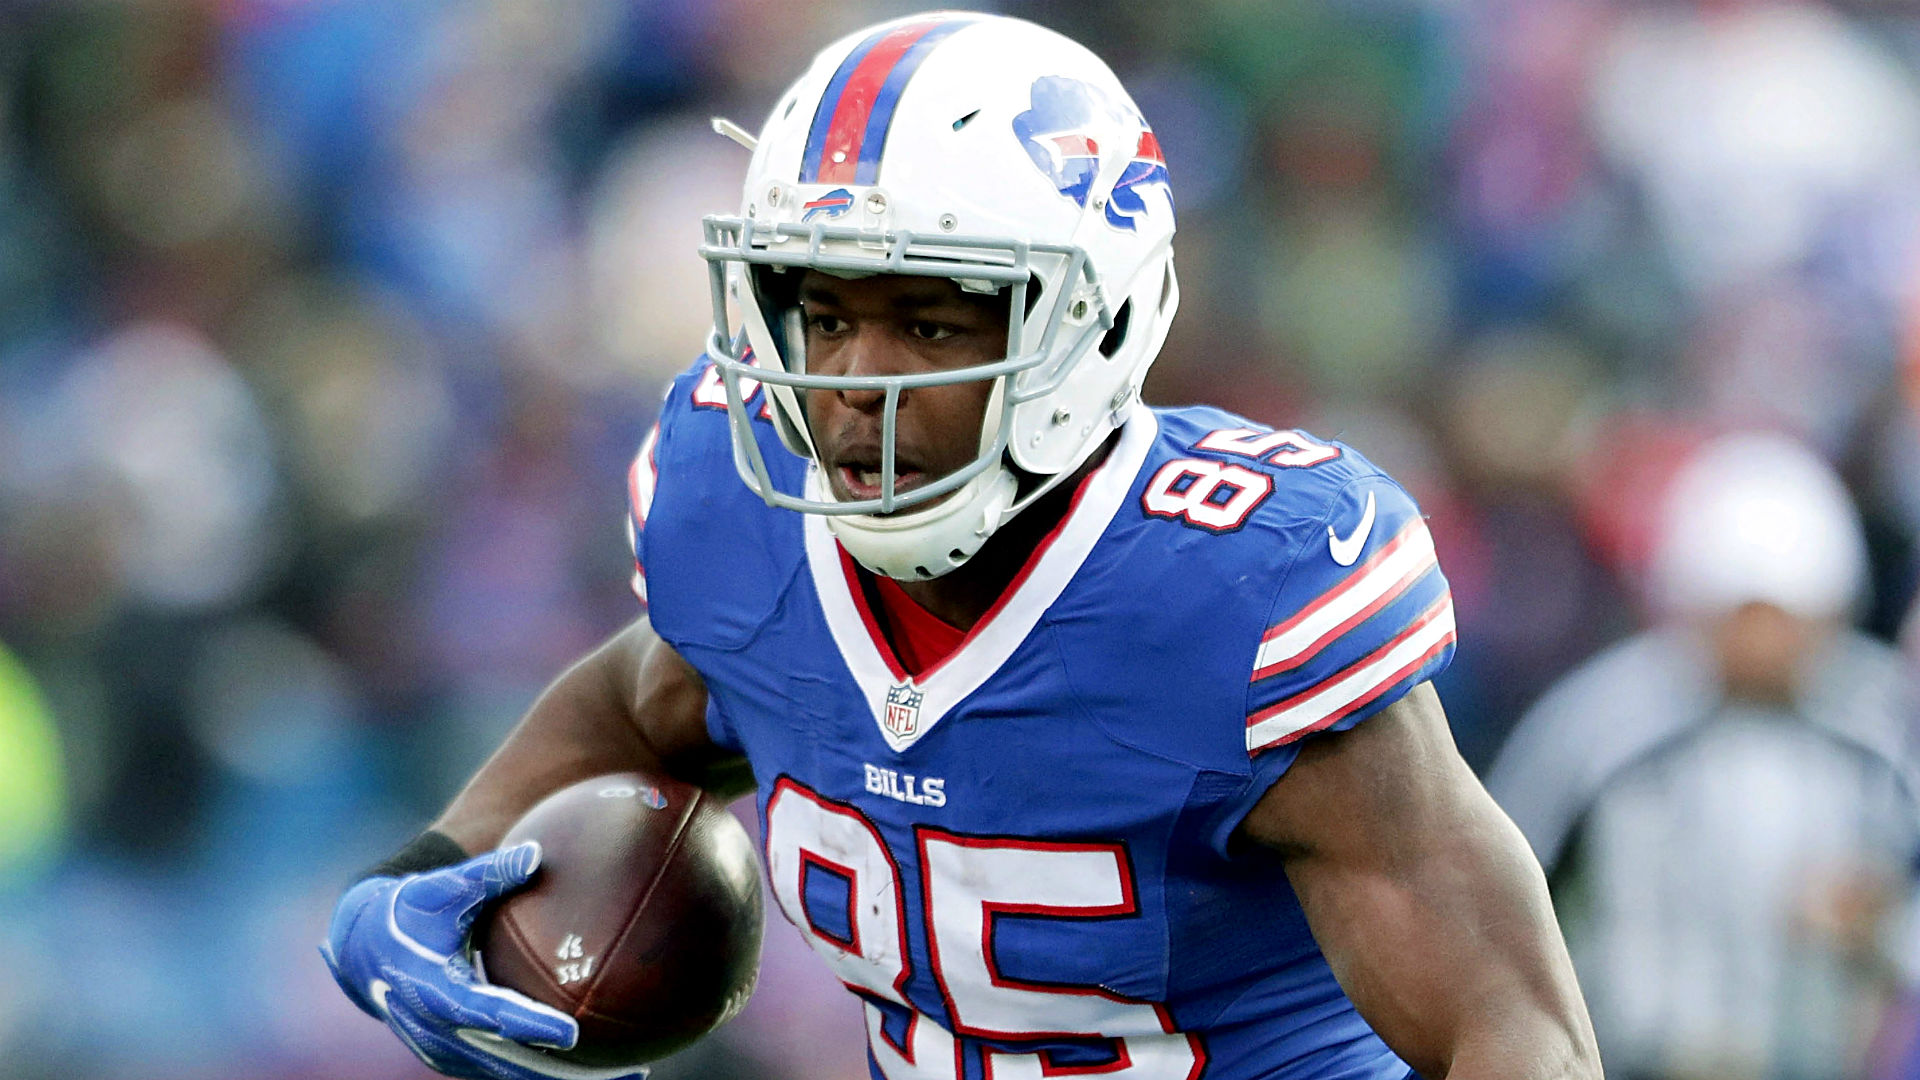 Bills TE Charles Clay has surgery on knee, report says